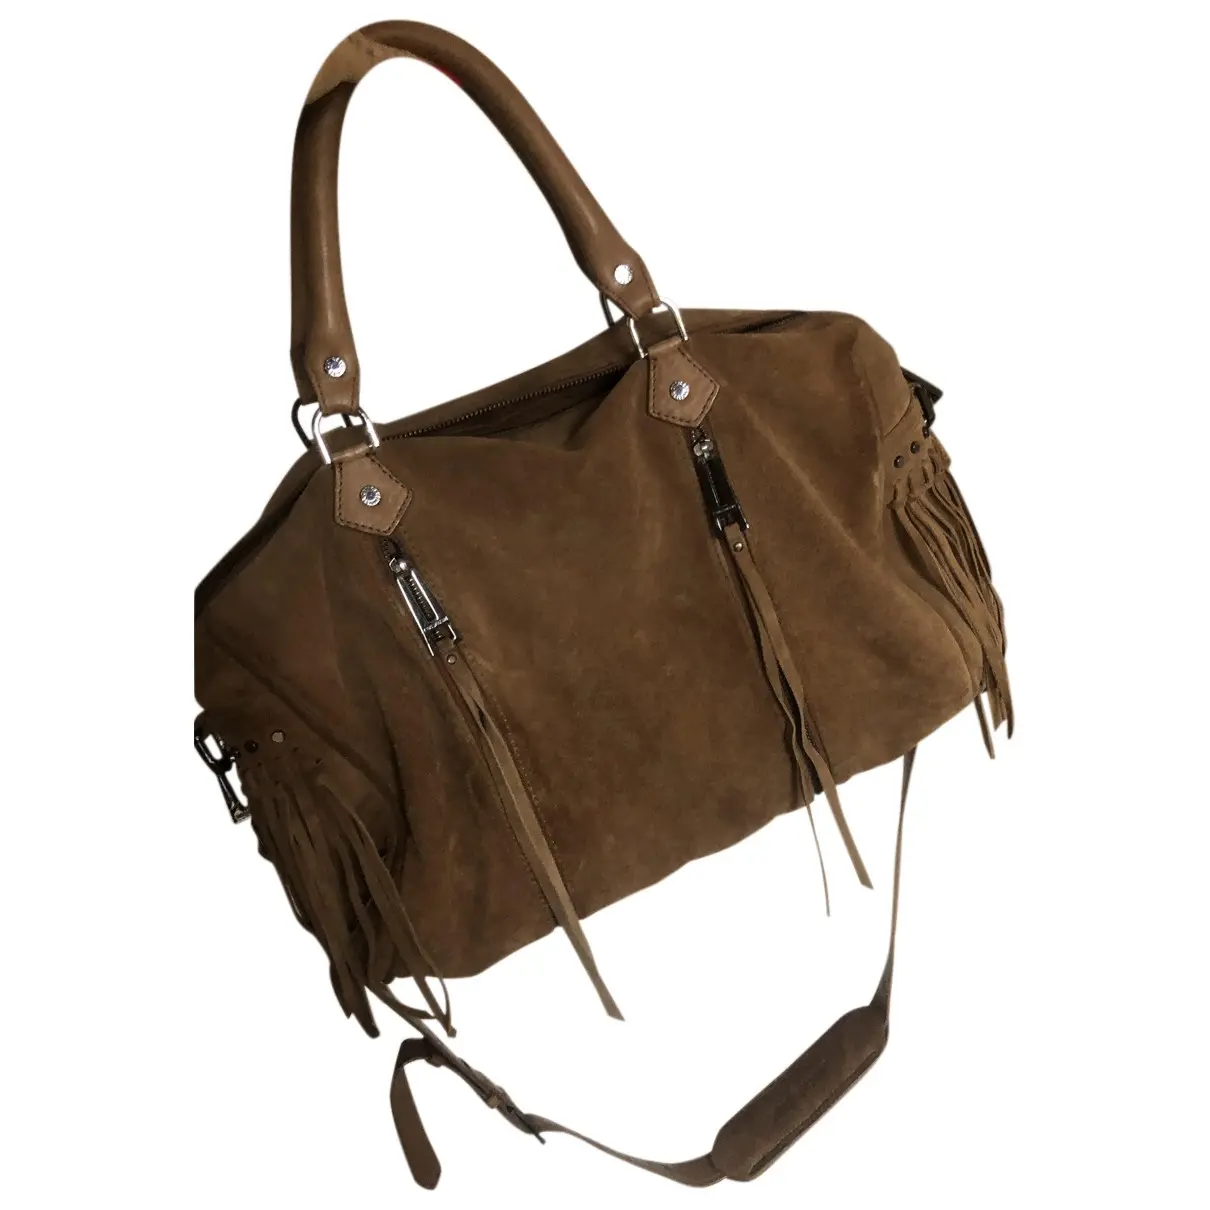 Daily leather handbag Zadig & Voltaire